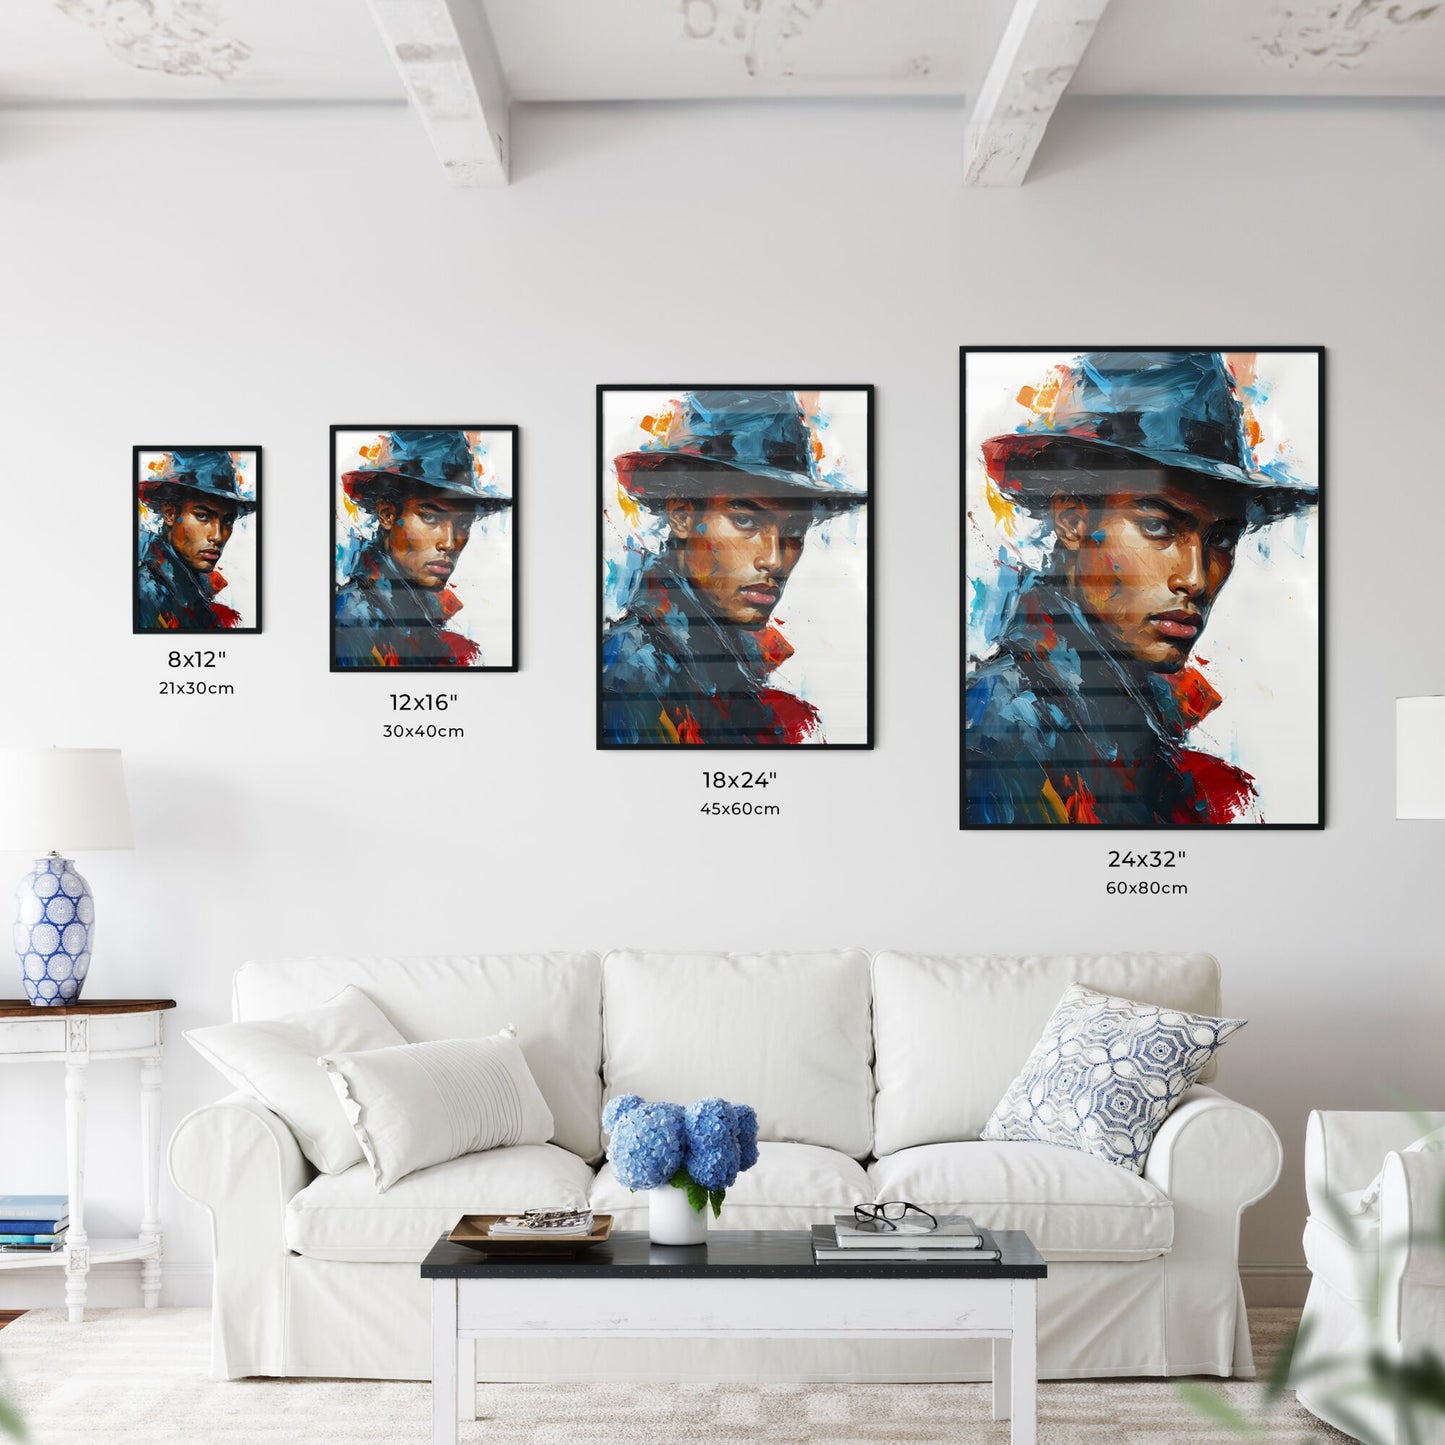 A Poster of Detective Alonzo Harris Portrait - A Painting Of A Man Wearing A Hat Default Title